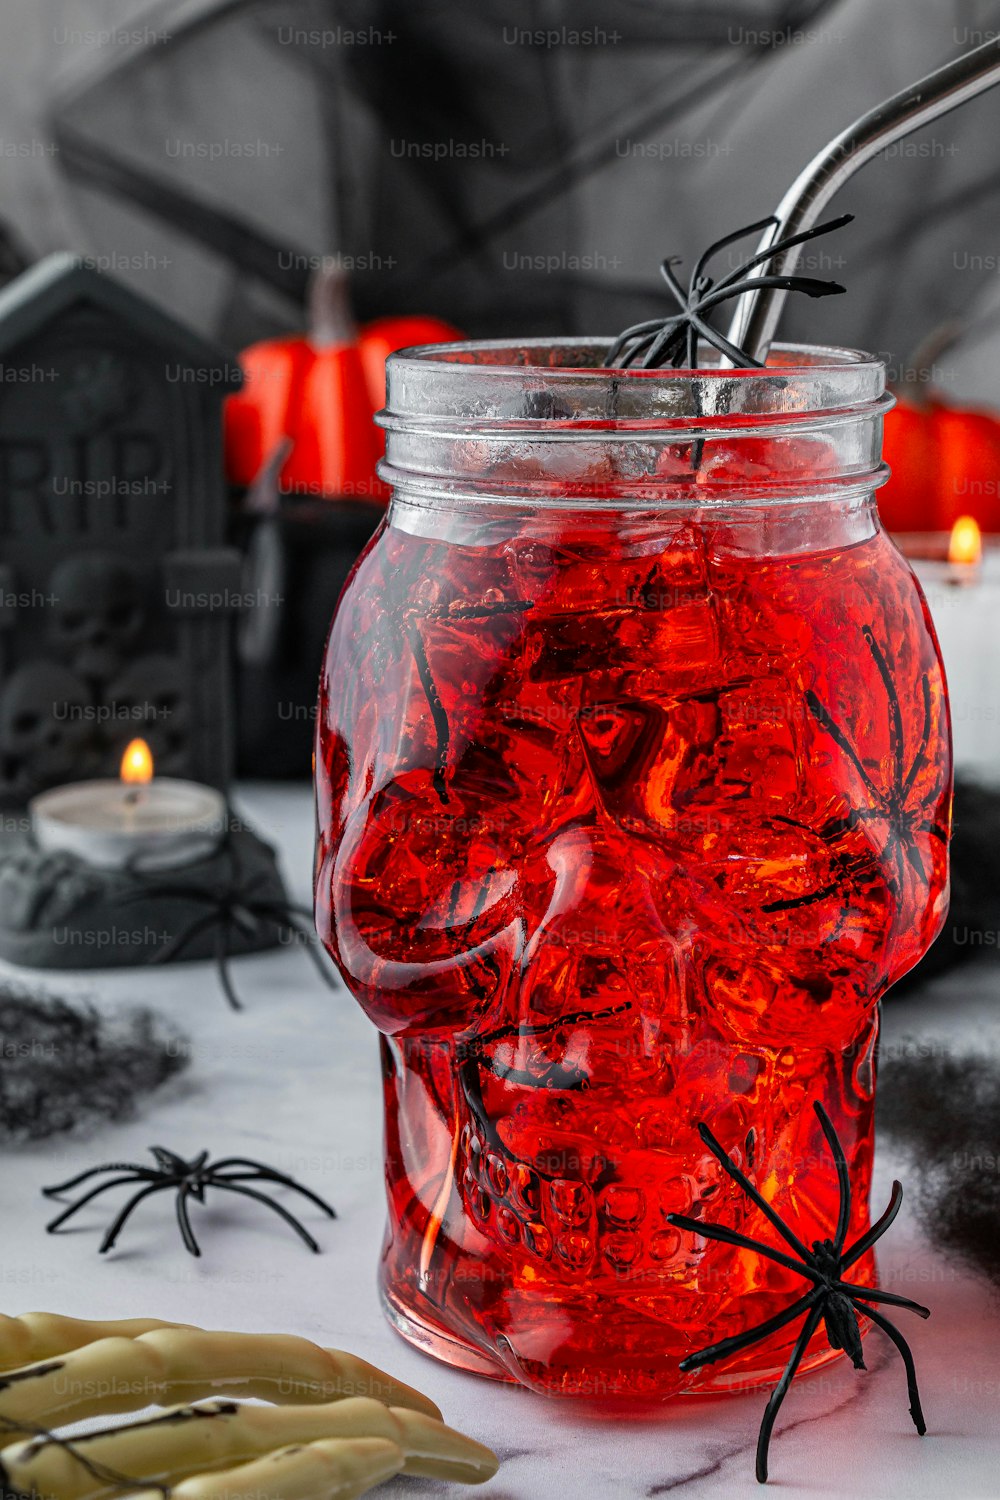 a jar filled with red liquid next to halloween decorations